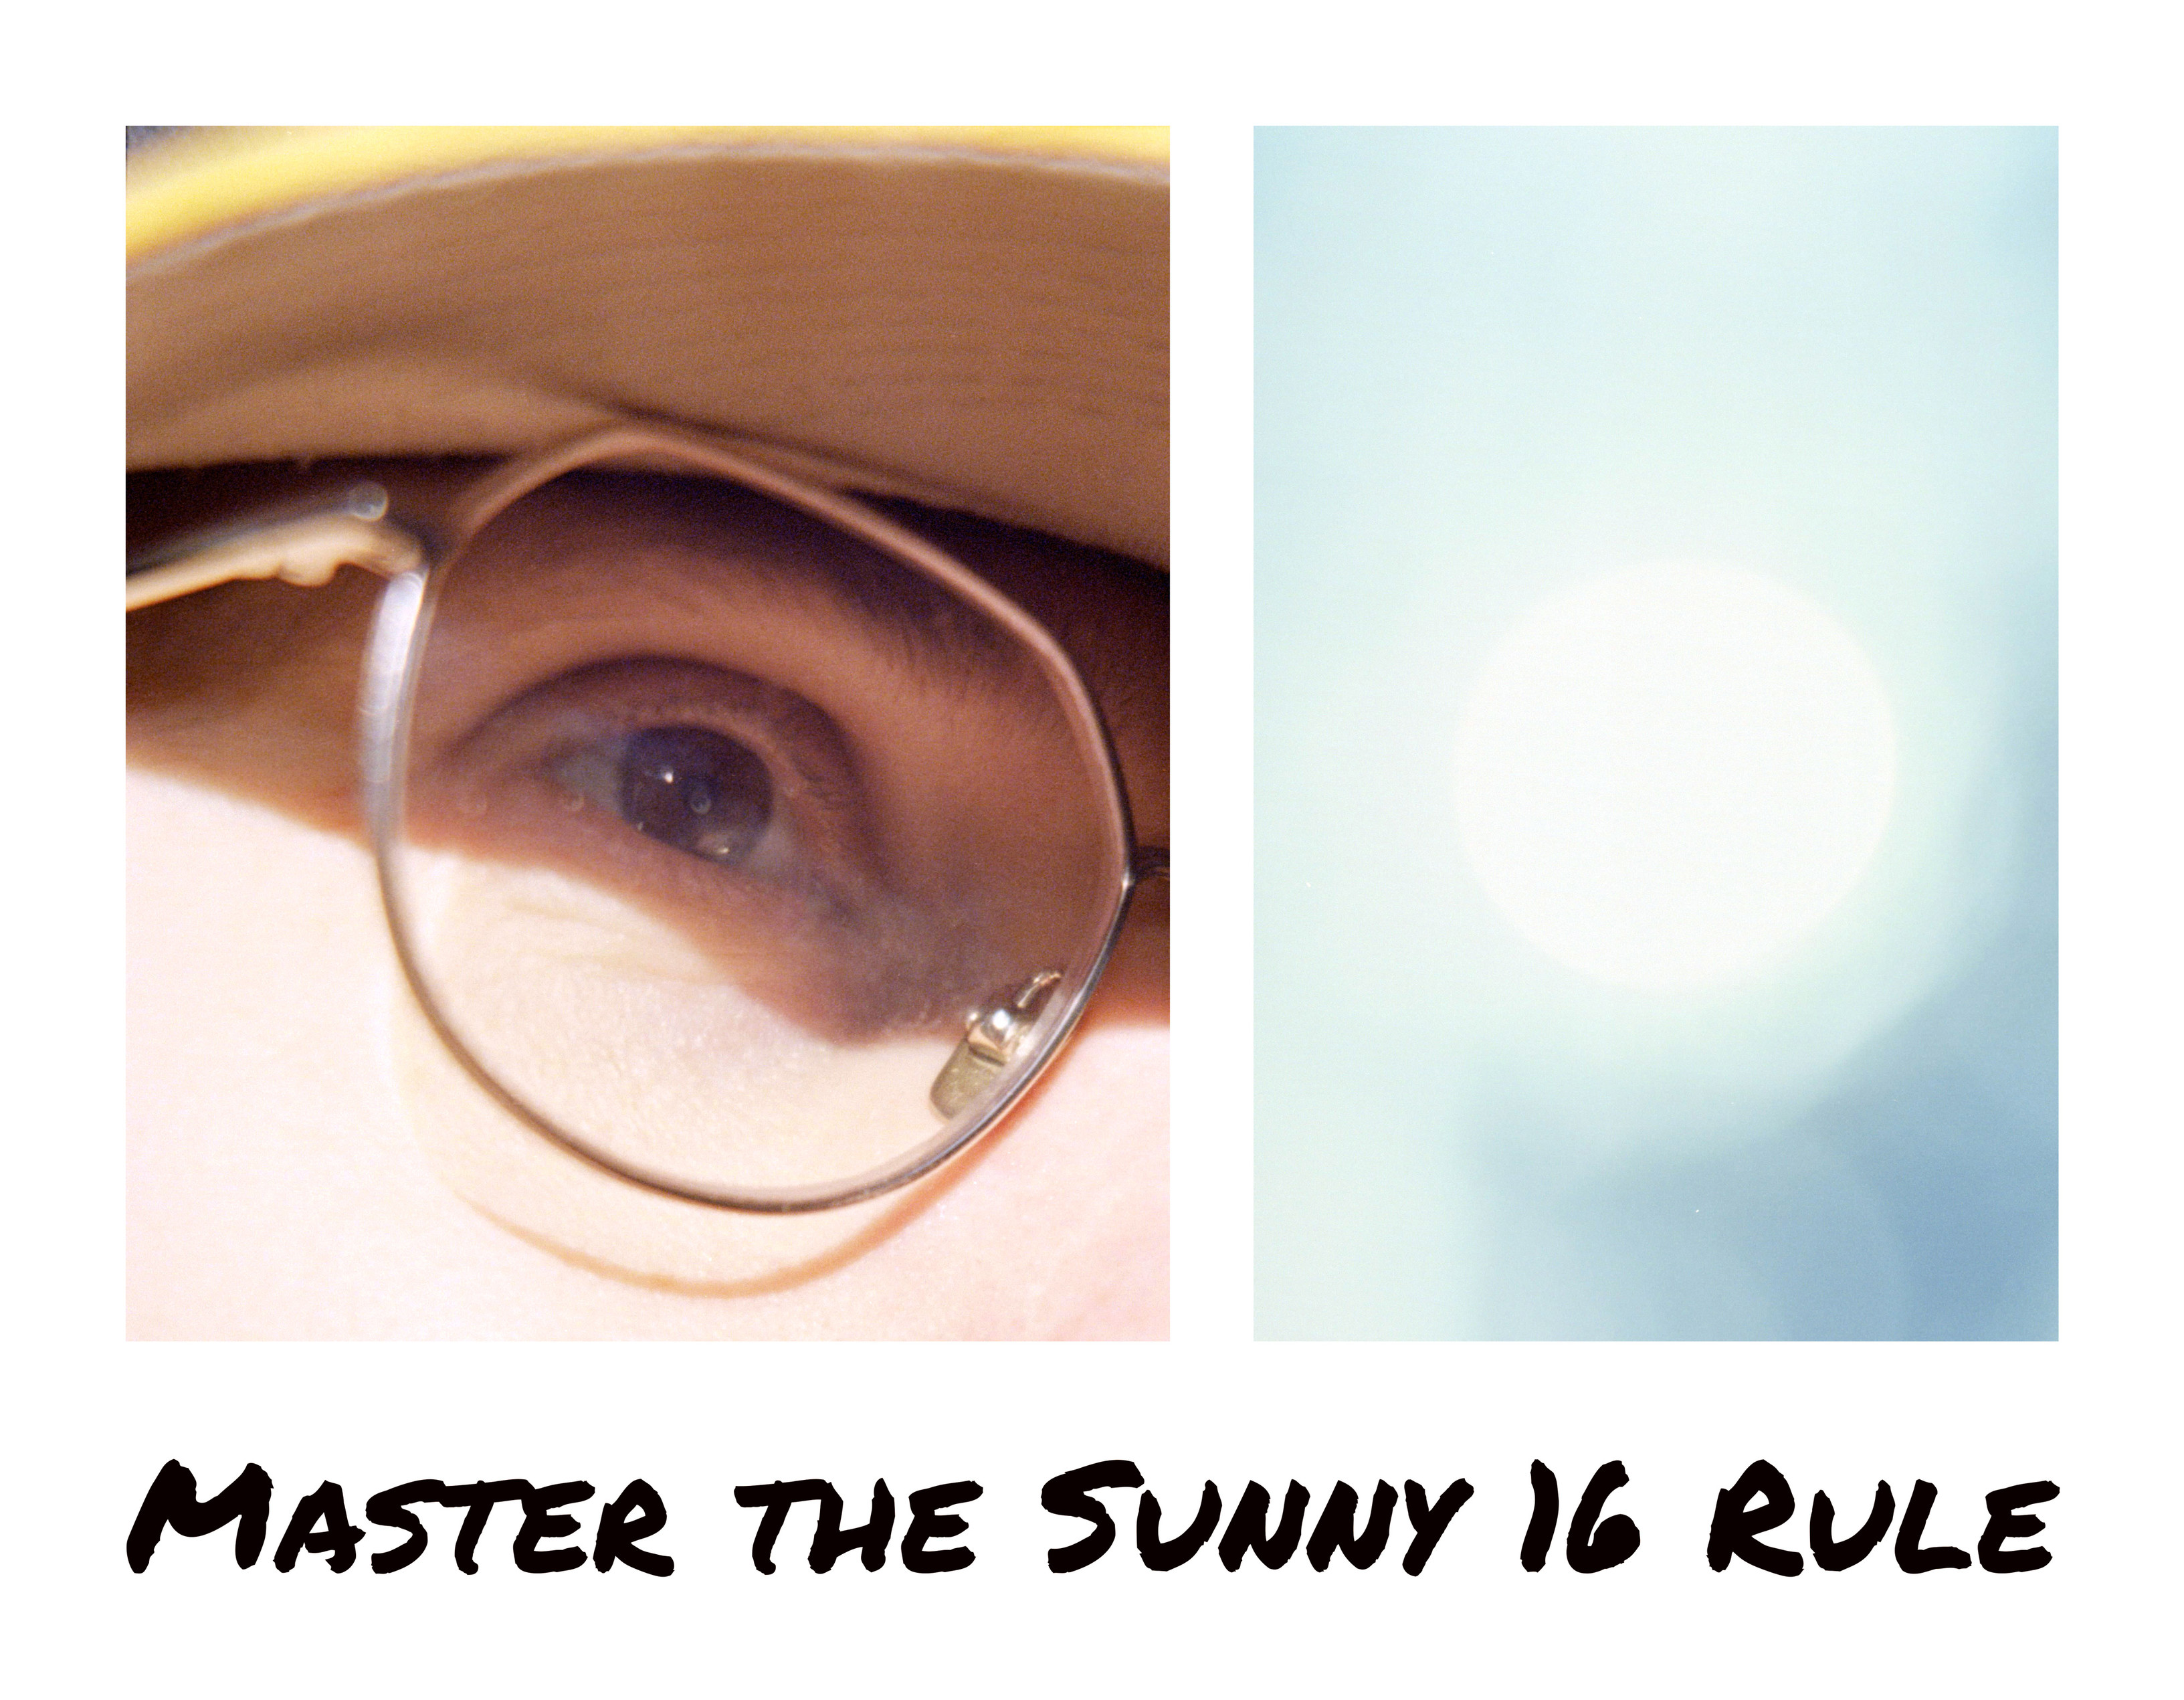 "Master the Sunny 16 Rule" text with a close-up photo of my eye above.